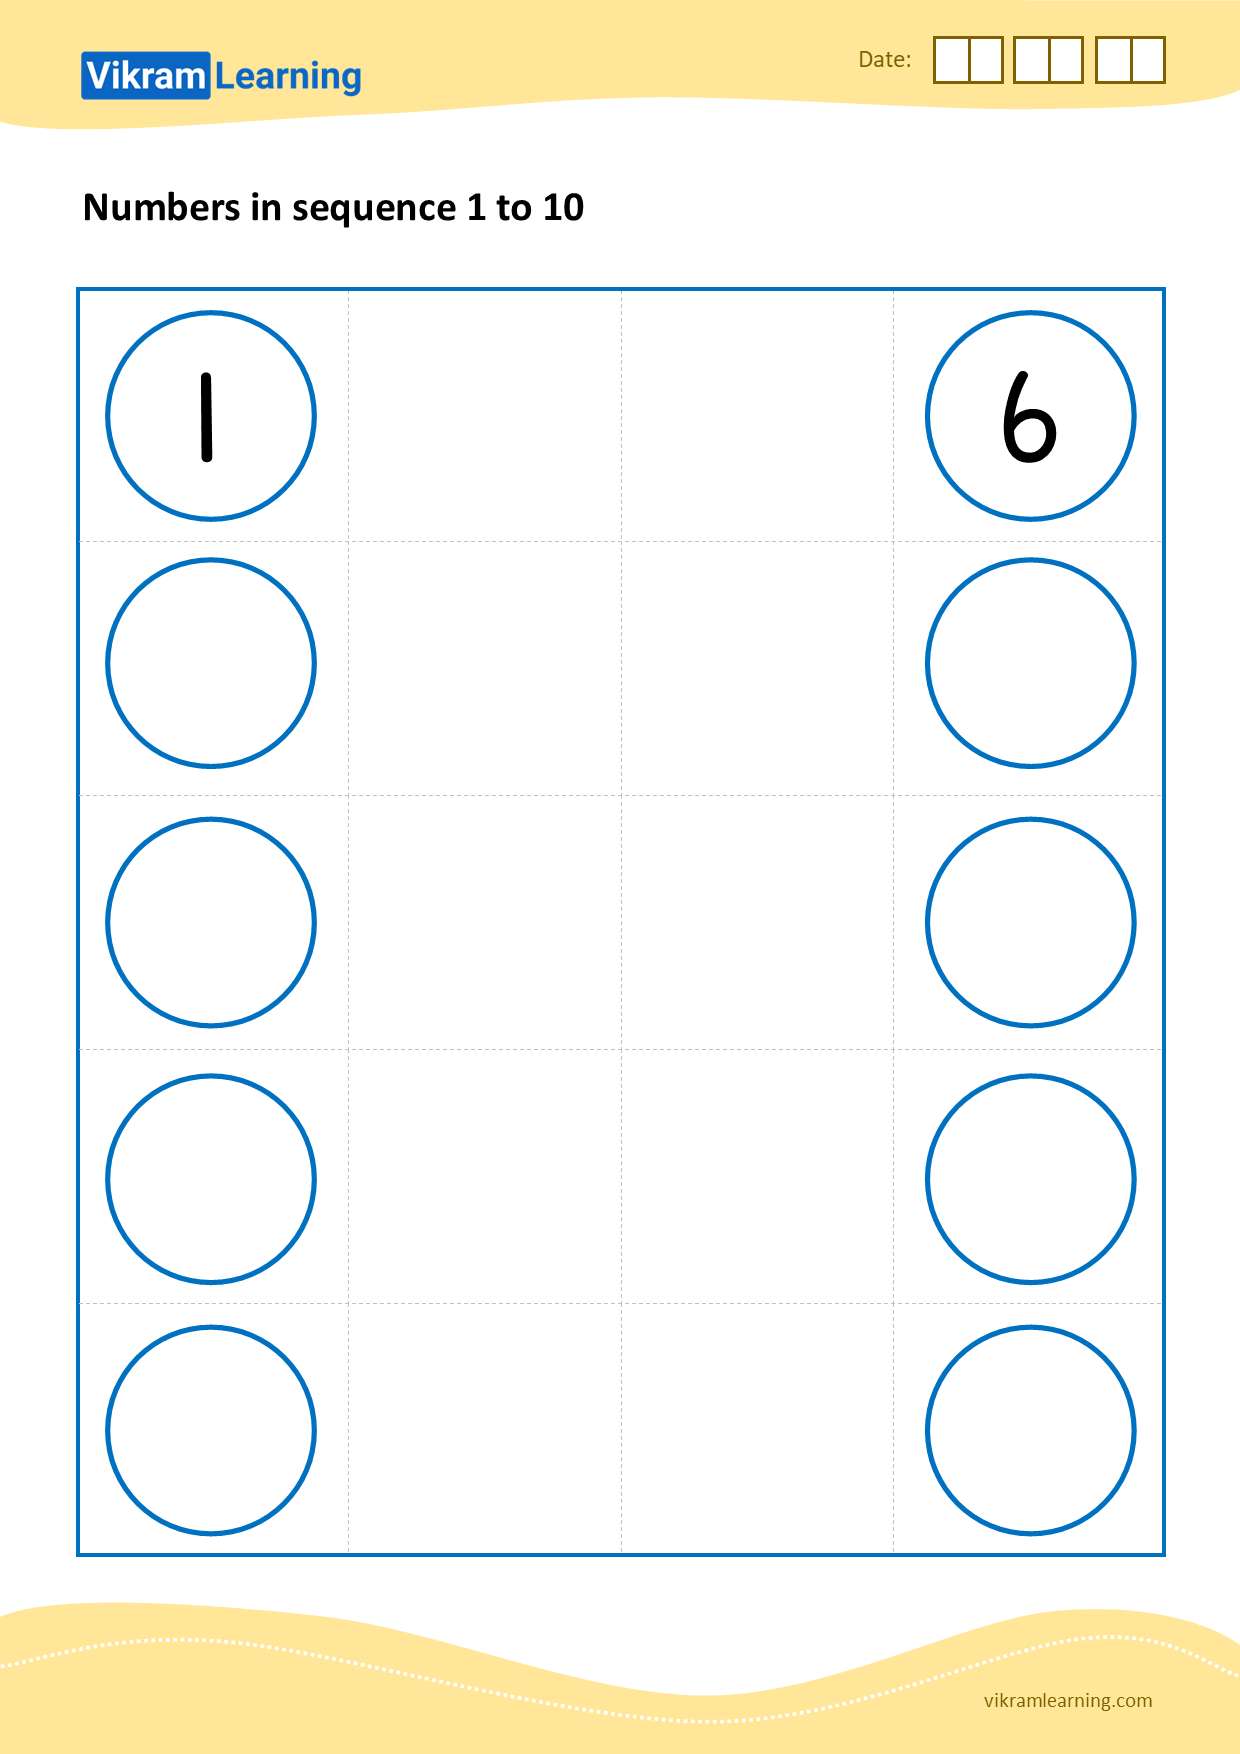 Download numbers in sequence 1 to 10 - pattern 4 worksheets